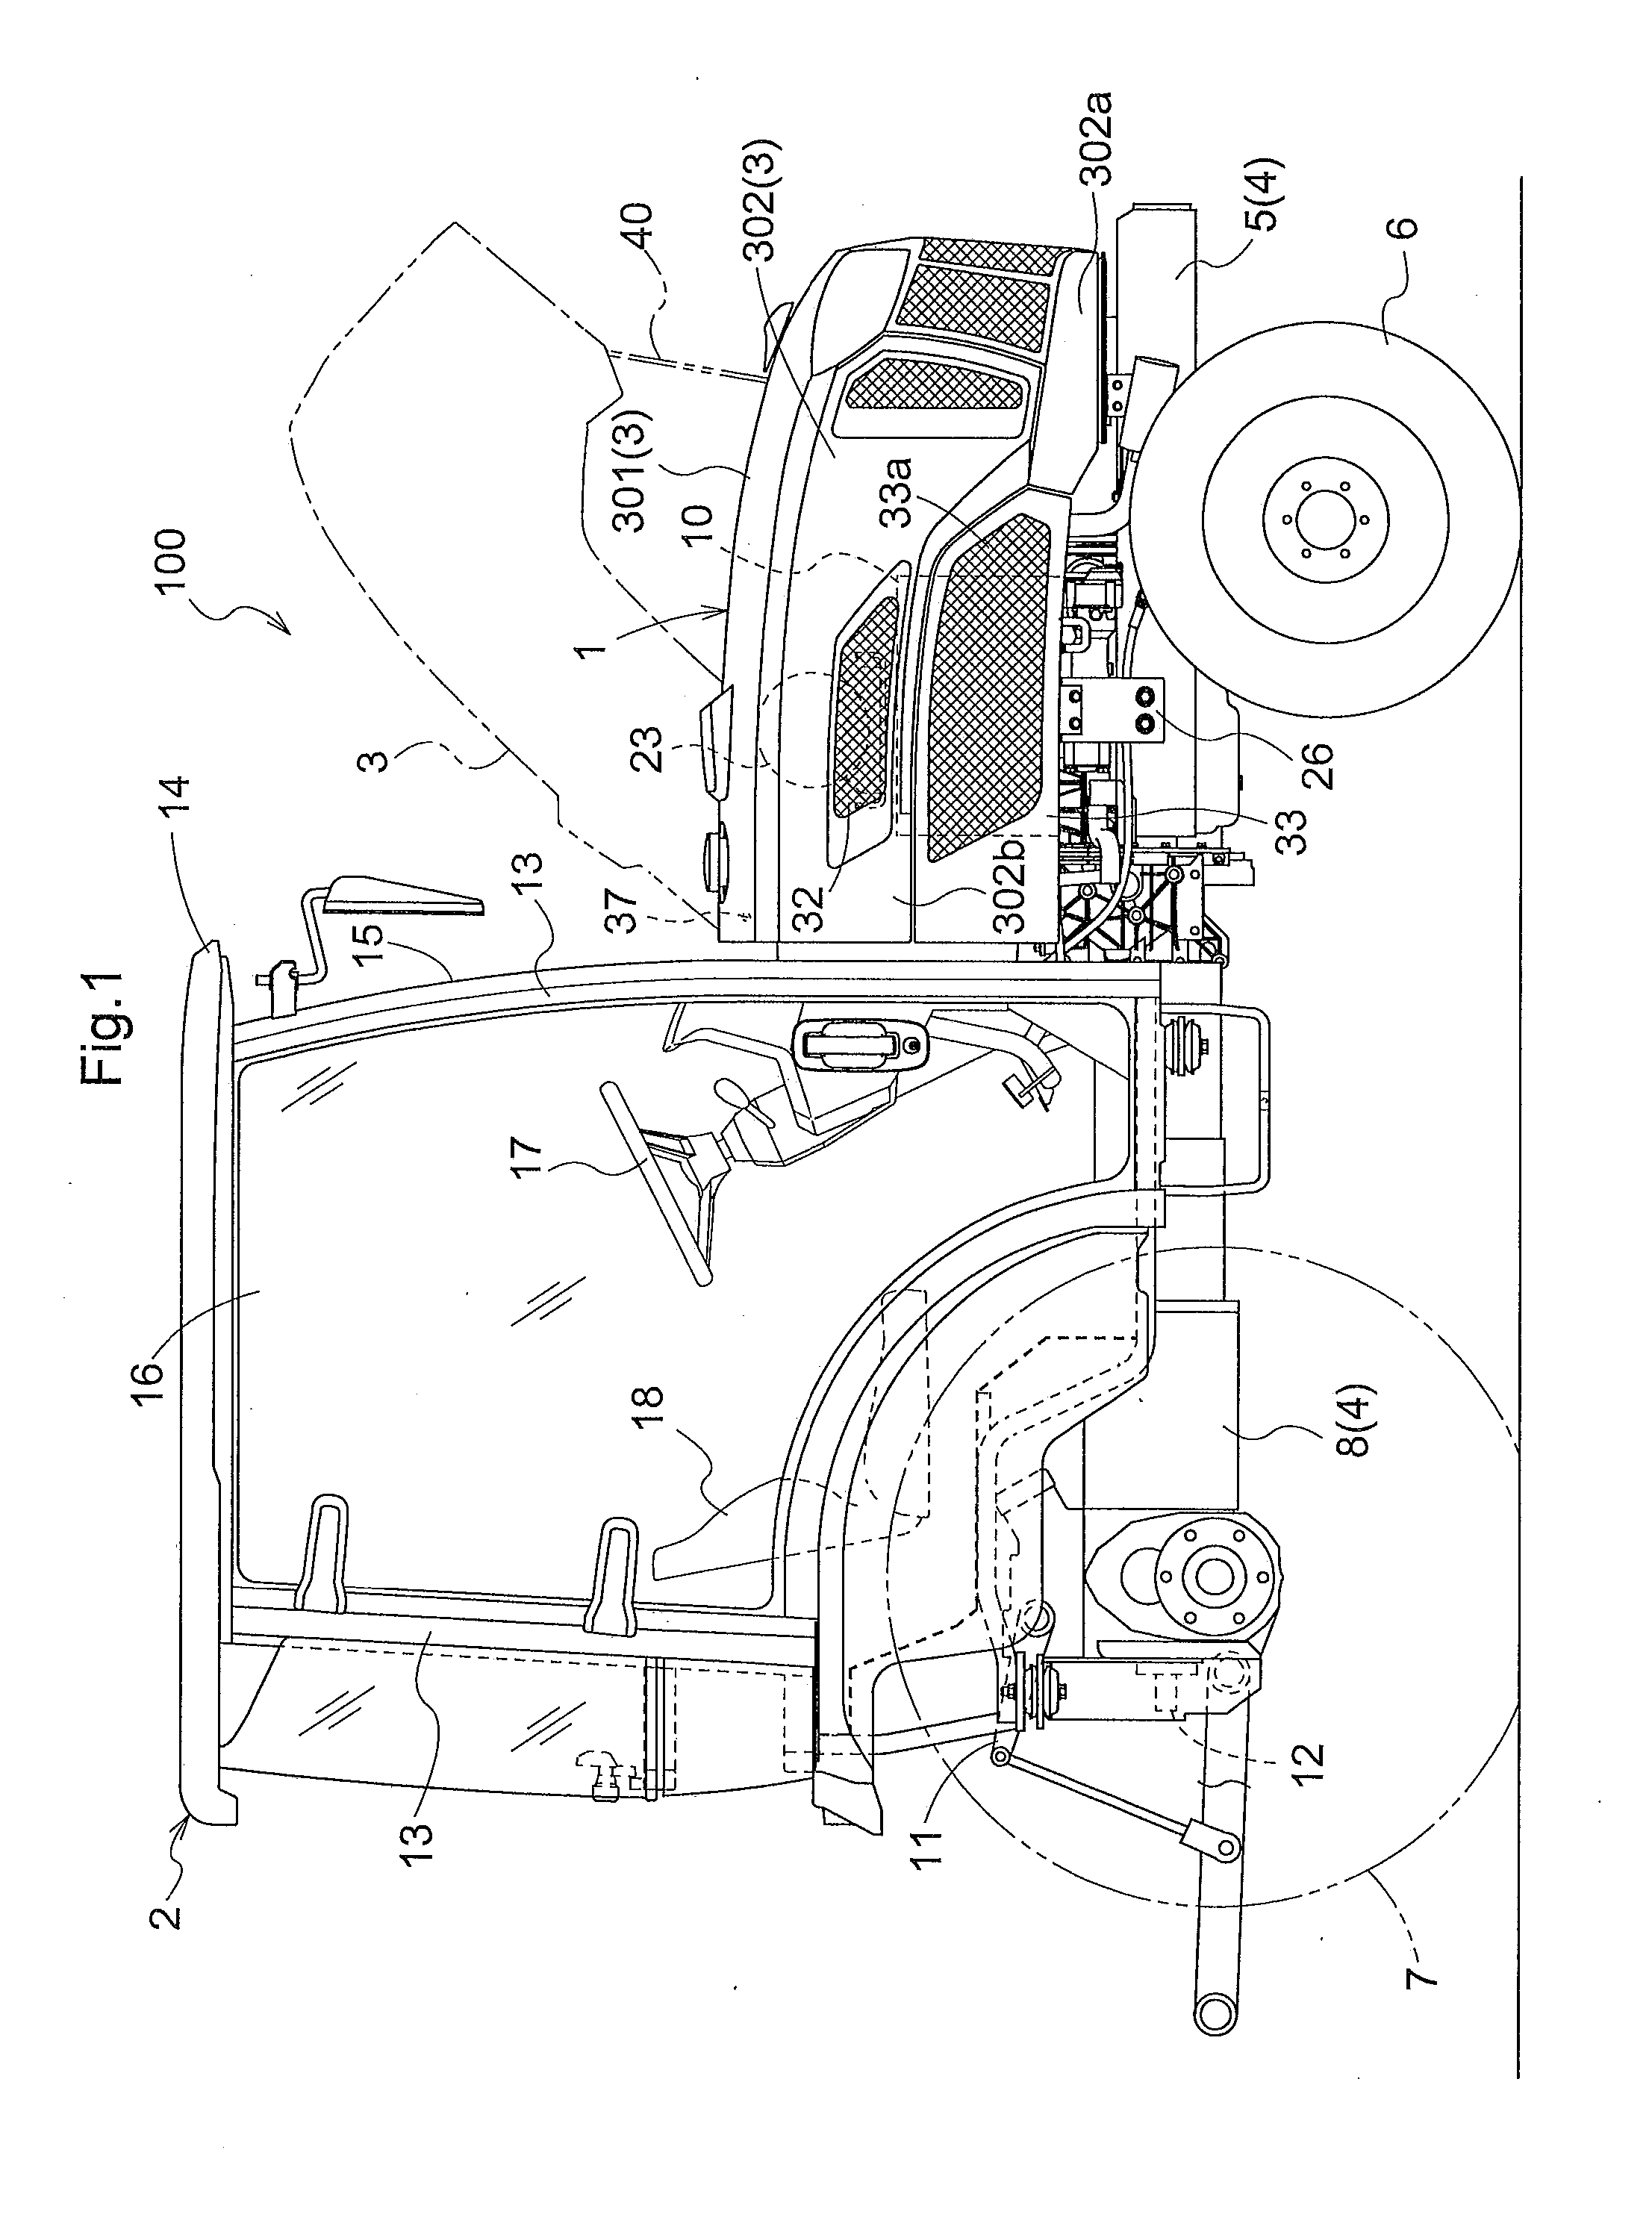 Work Vehicle Having an Exhaust Treatment Apparatus in an Engine Room